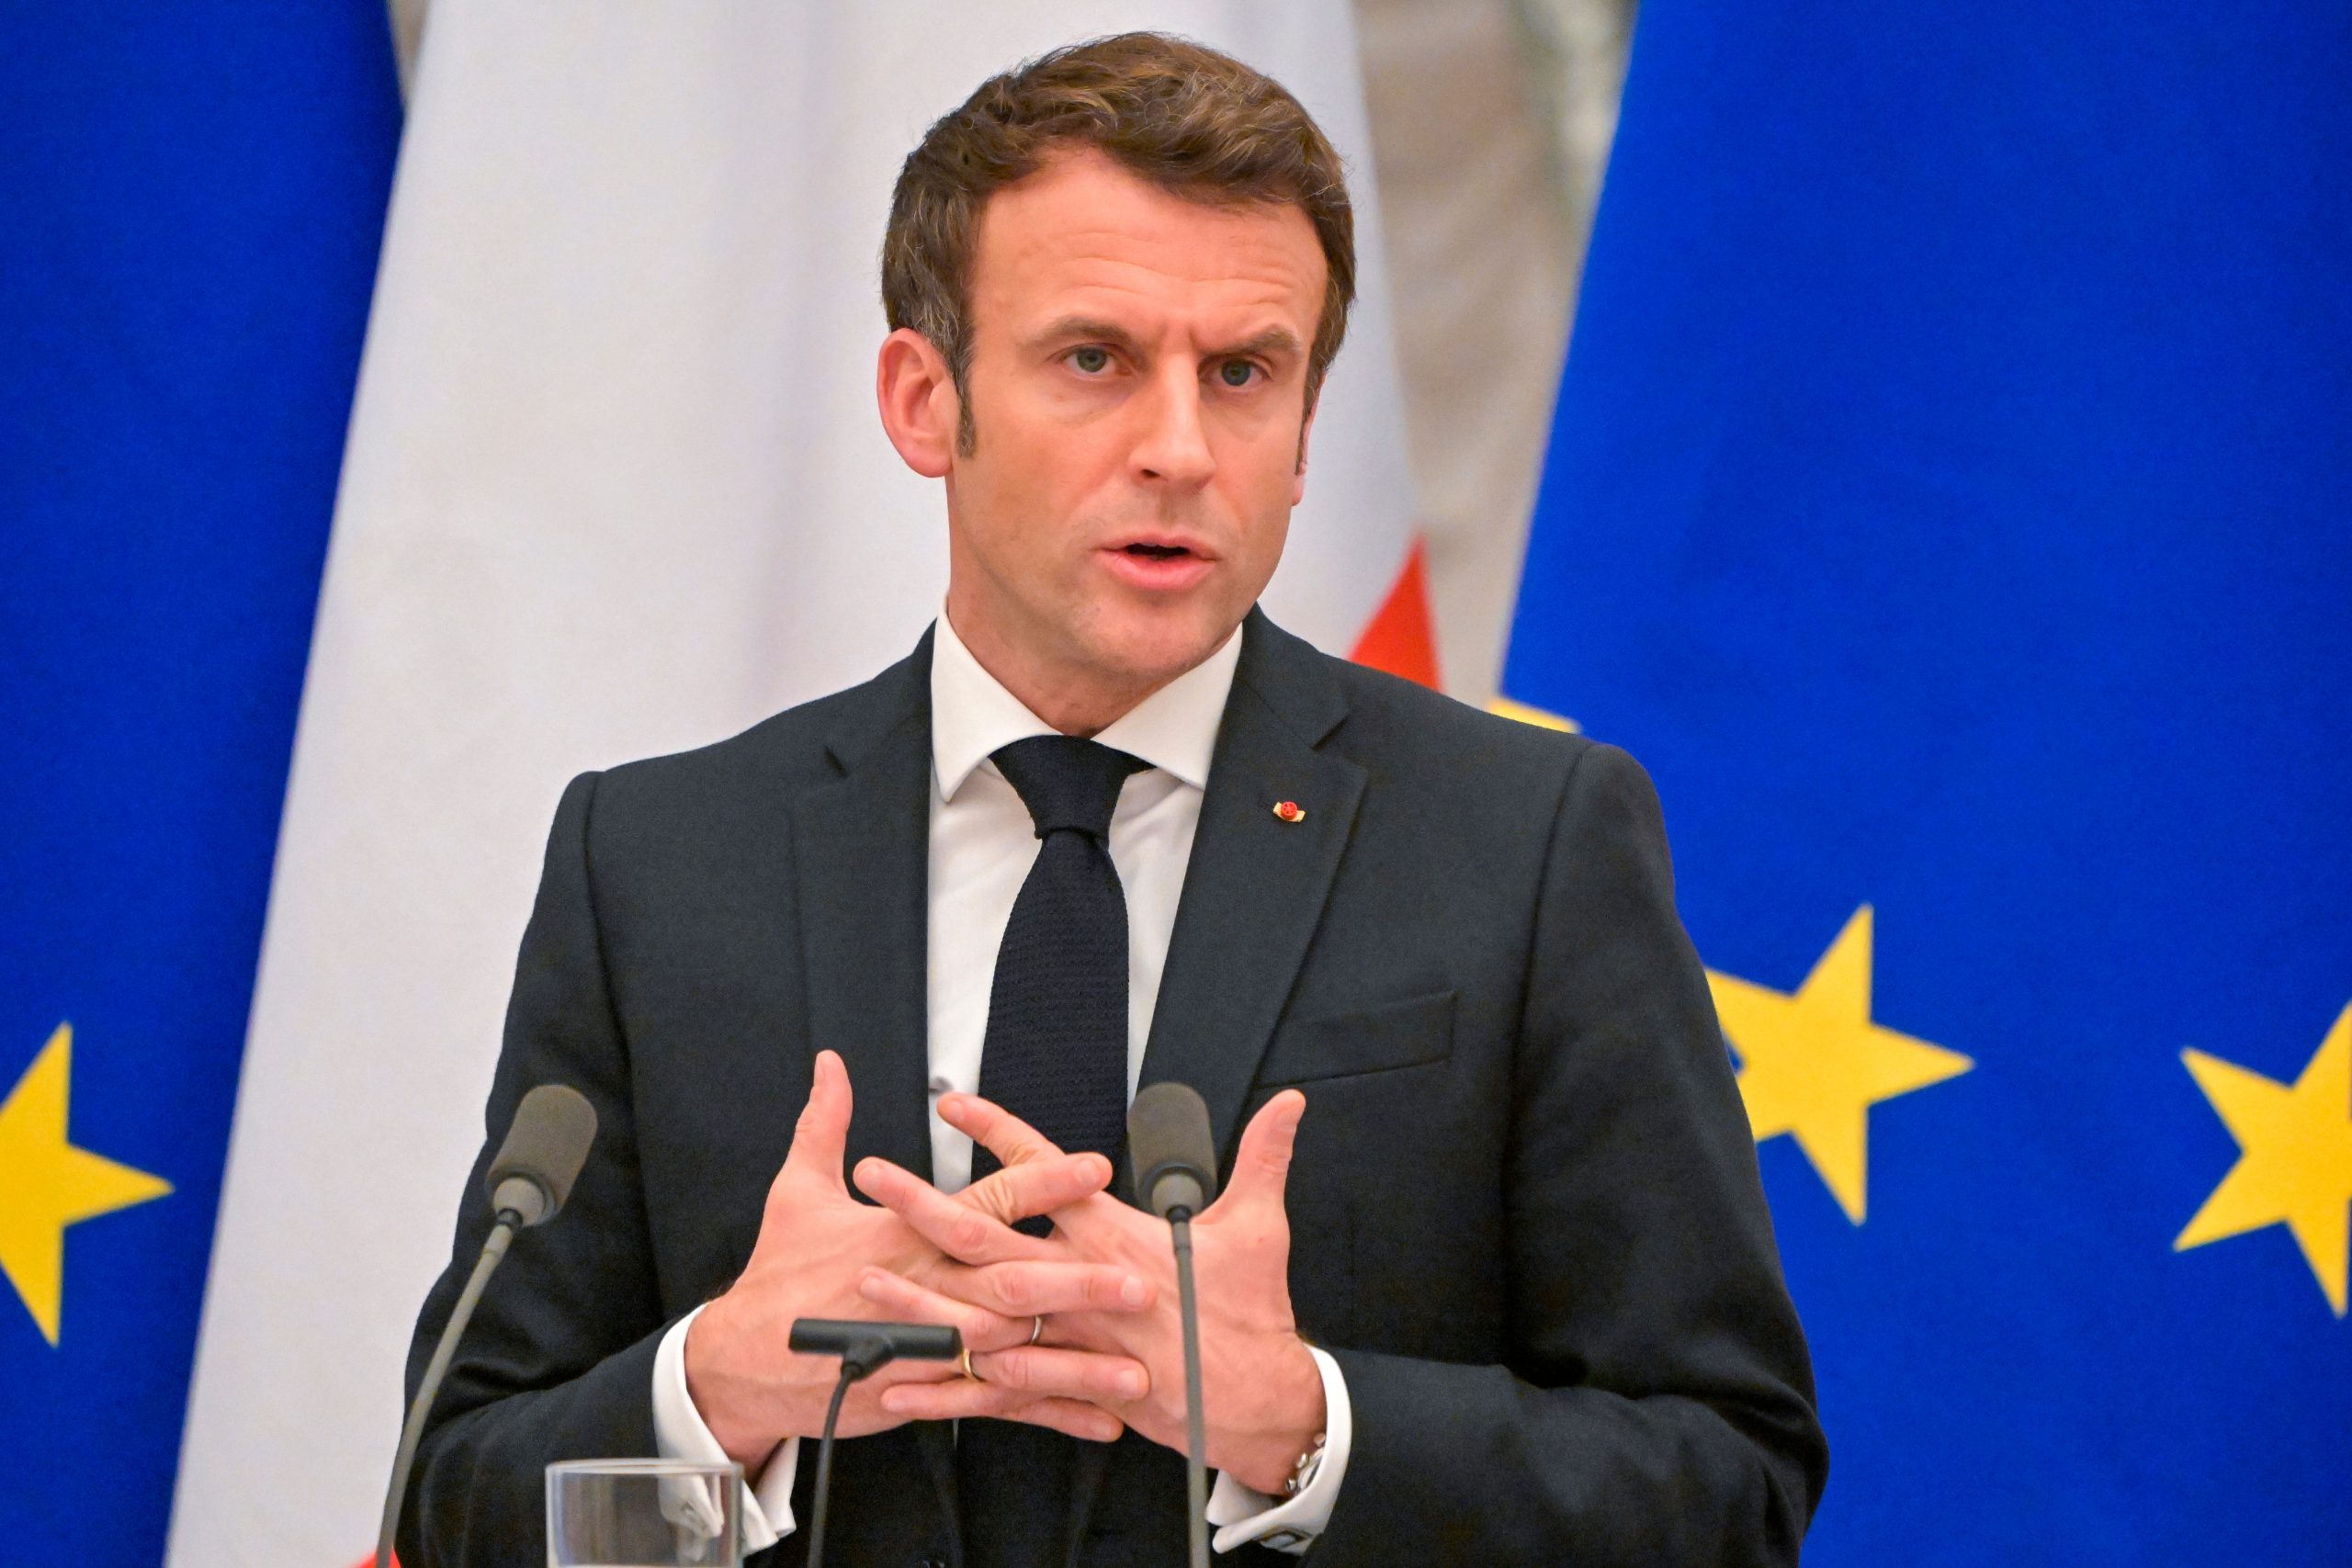 Polling agencies project re-election for French leader Macron